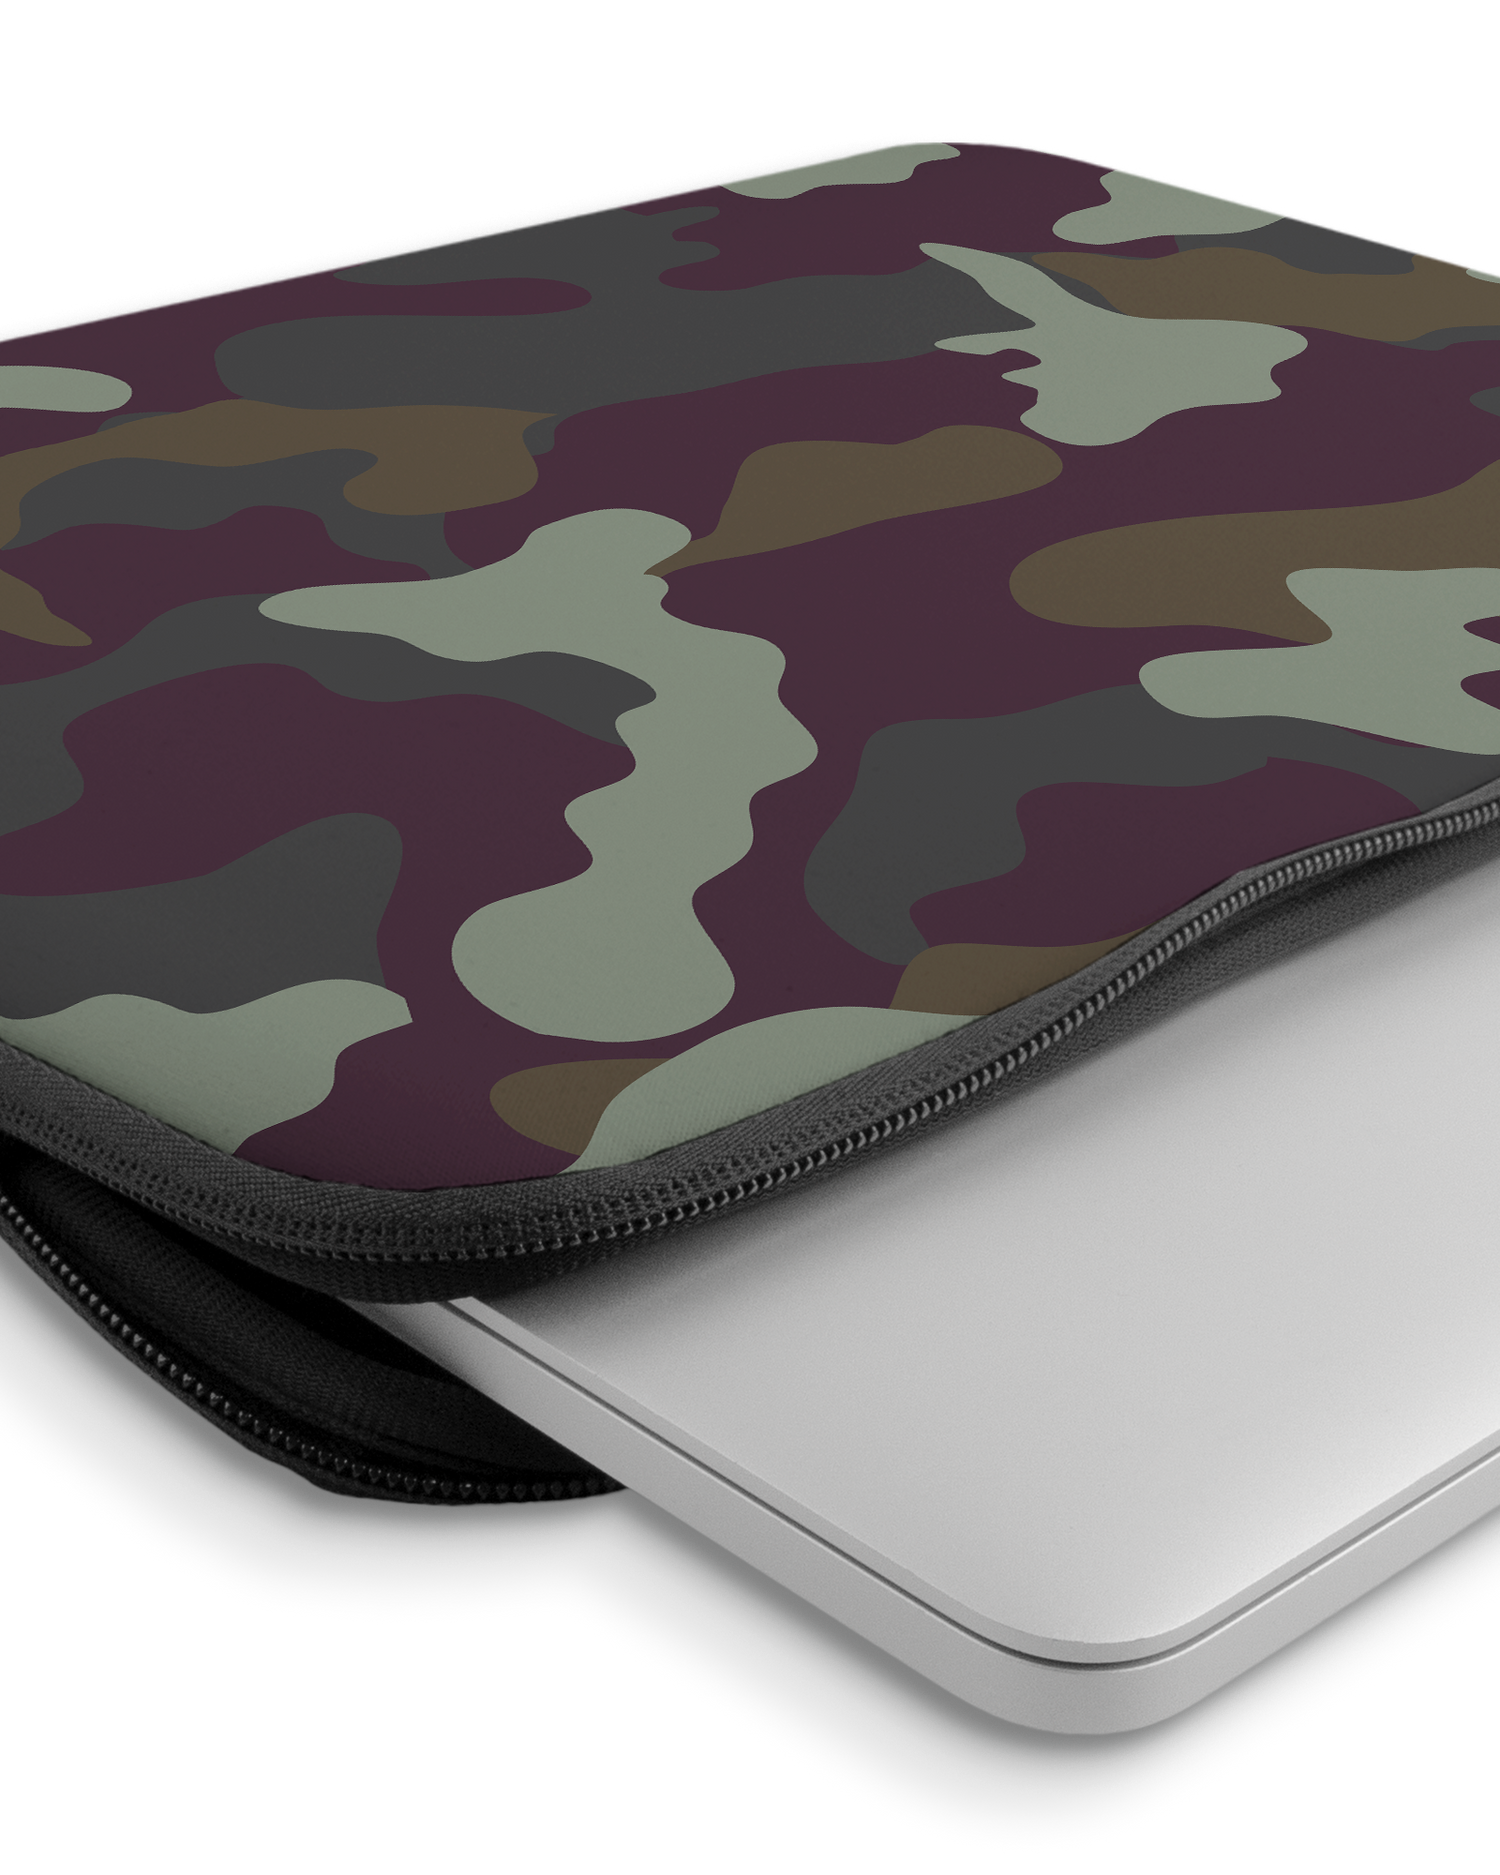 Night Camo Laptop Case 14-15 inch with device inside